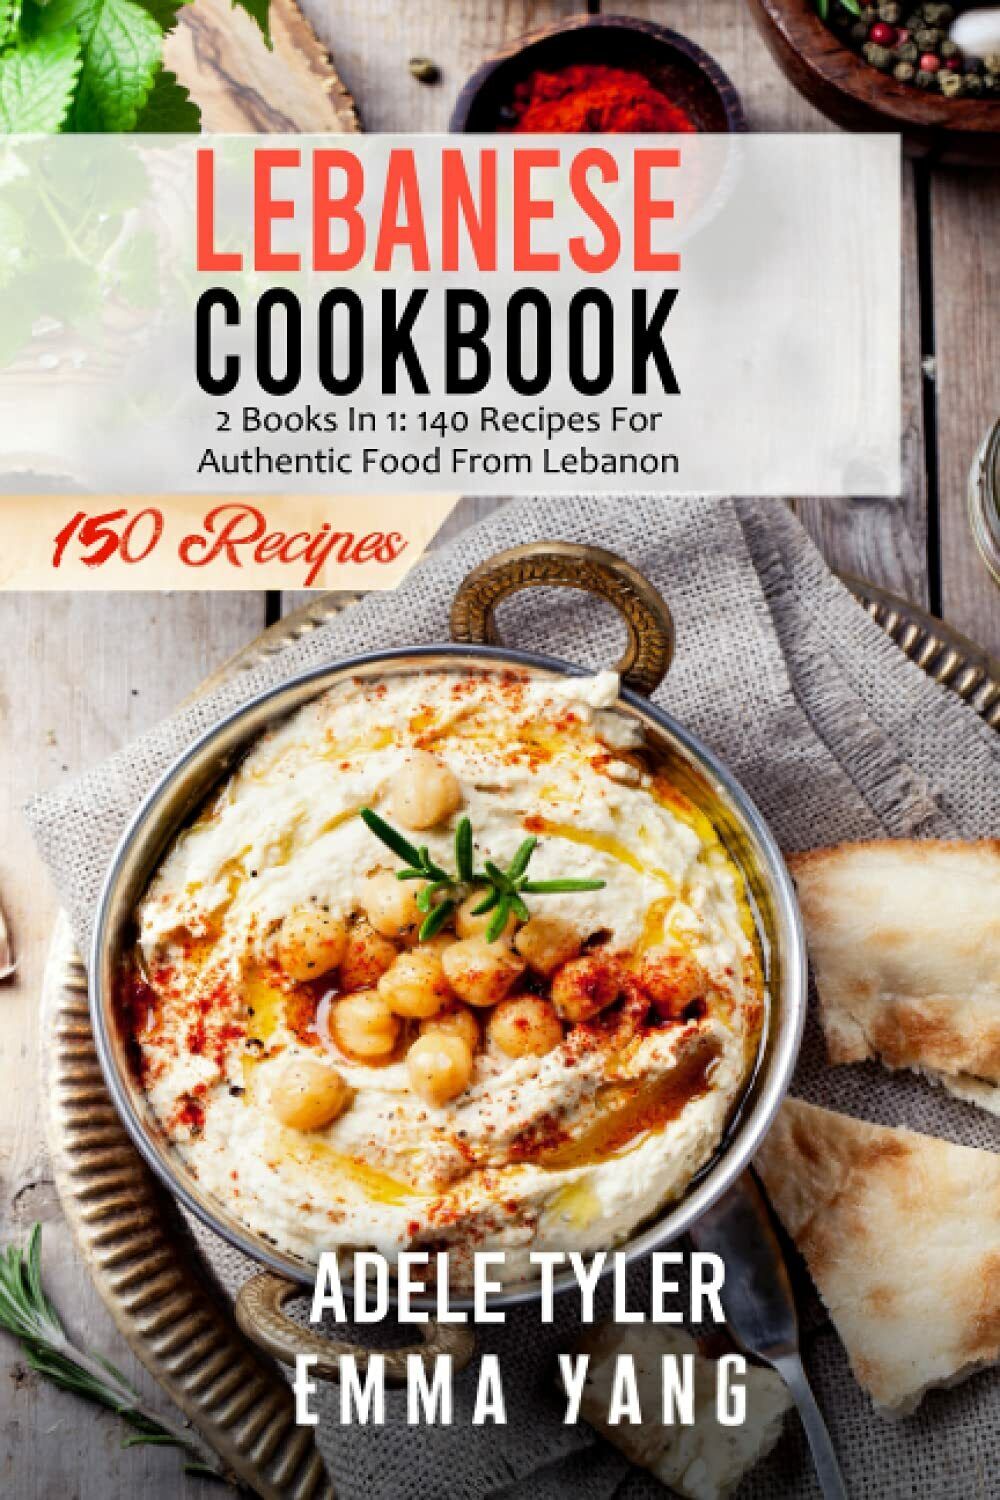  Lebanese Cookbook: 2 Books In 1: 140 Recipes For Authentic Food From Lebanon d